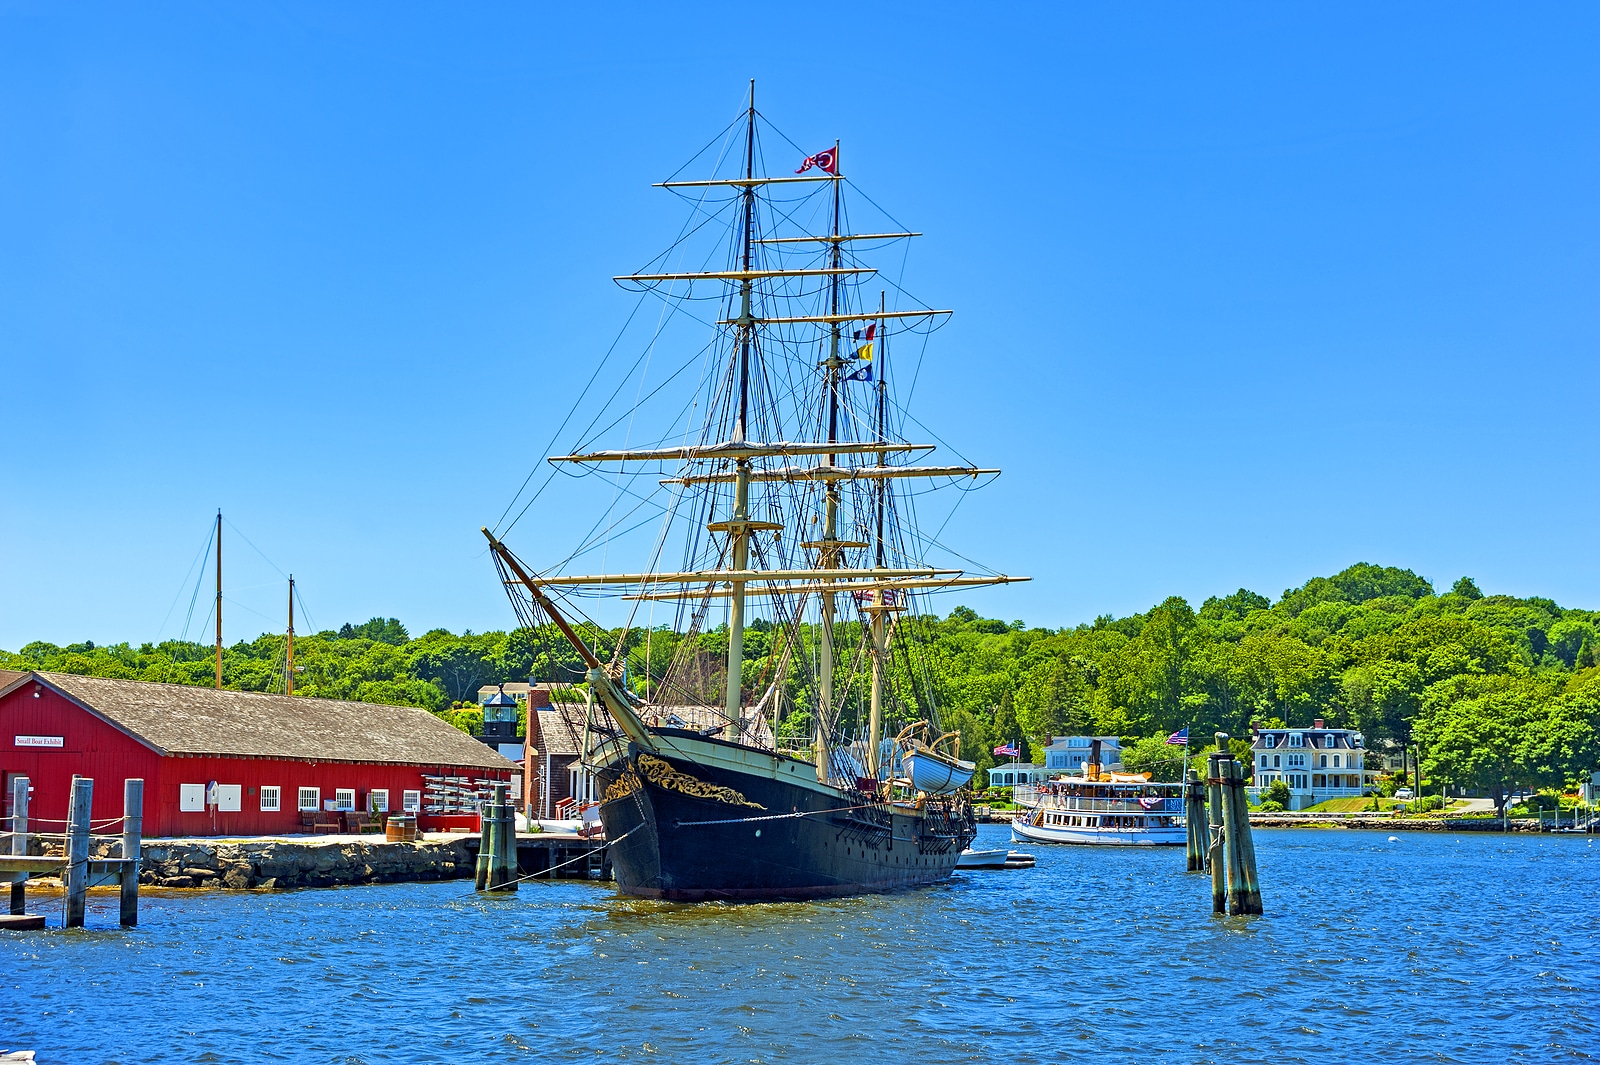 6 AMAZING Things At The Mystic Seaport Museum You Must Do